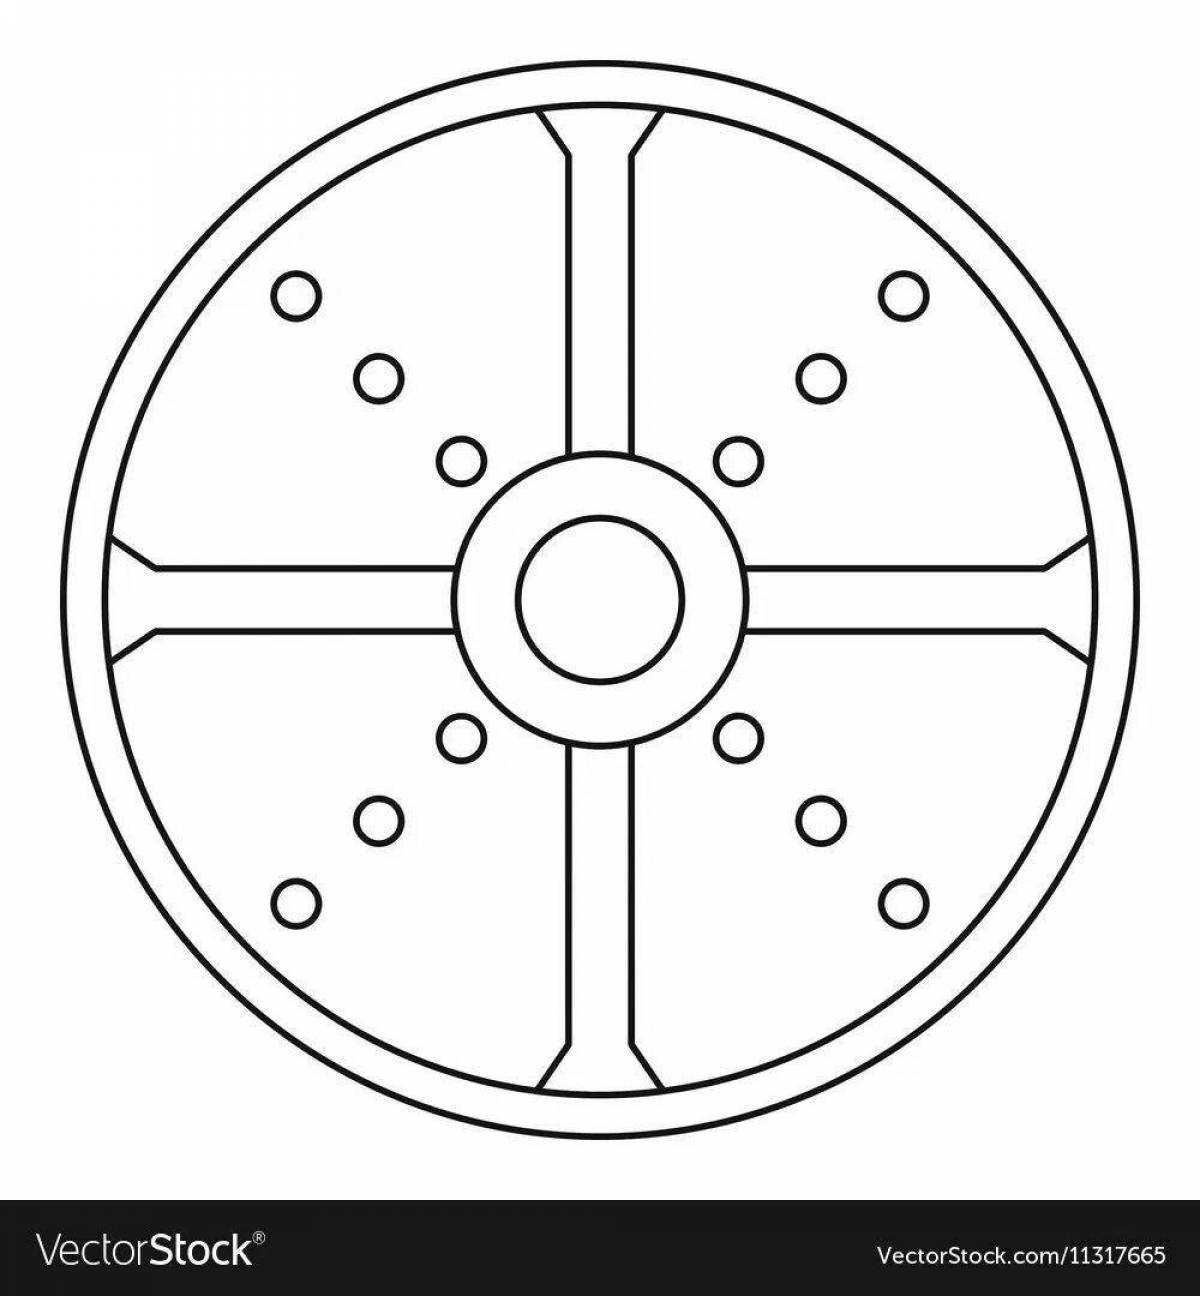 Majestic hero shield coloring page